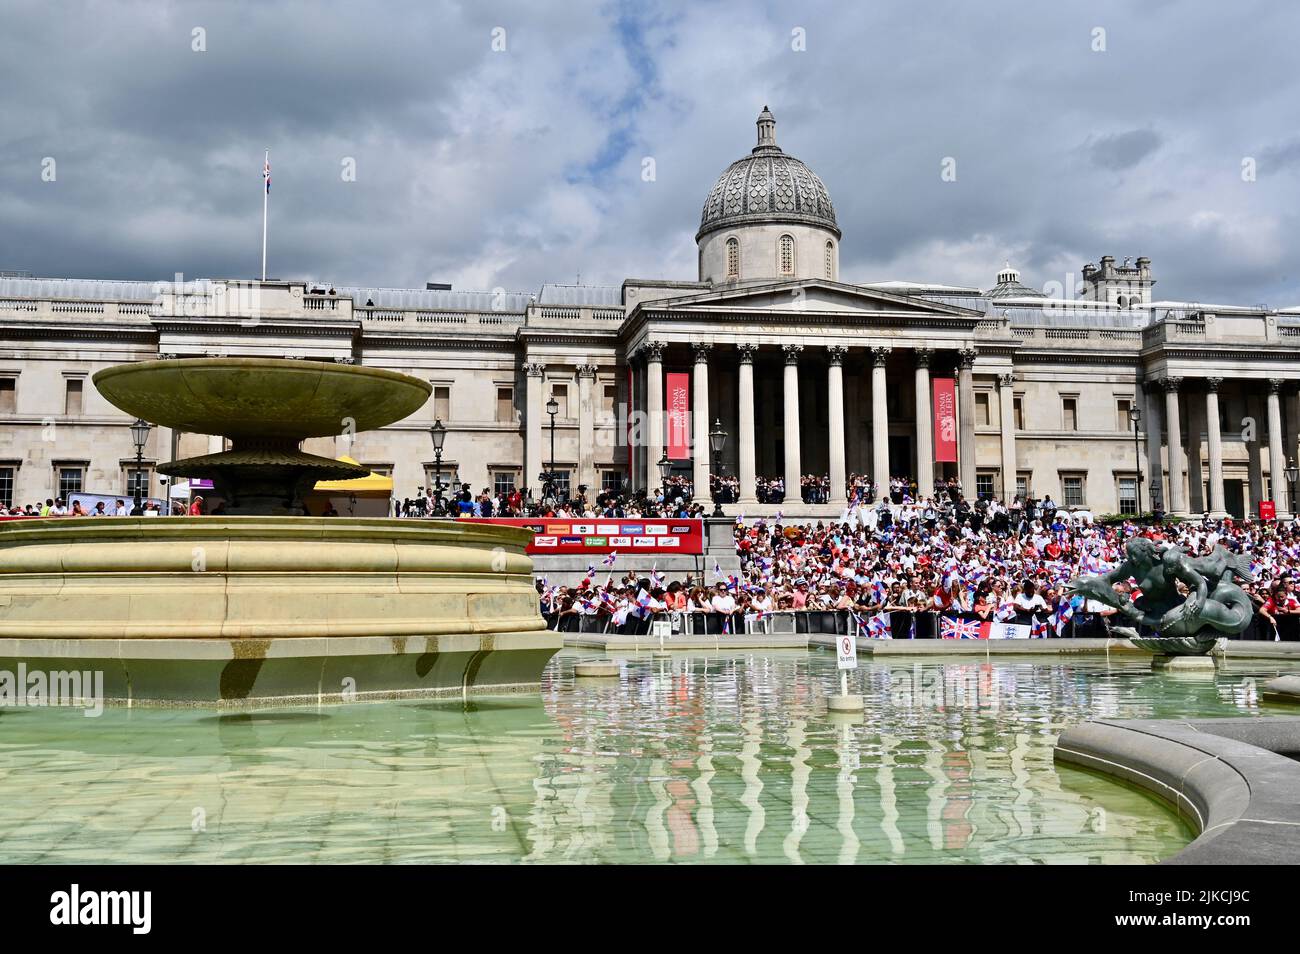 London, UK. England fans celebrated the Women's Euro 2022 win with the Lionesses in Trafalgar Square. Credit: michael melia/Alamy Live News Stock Photo